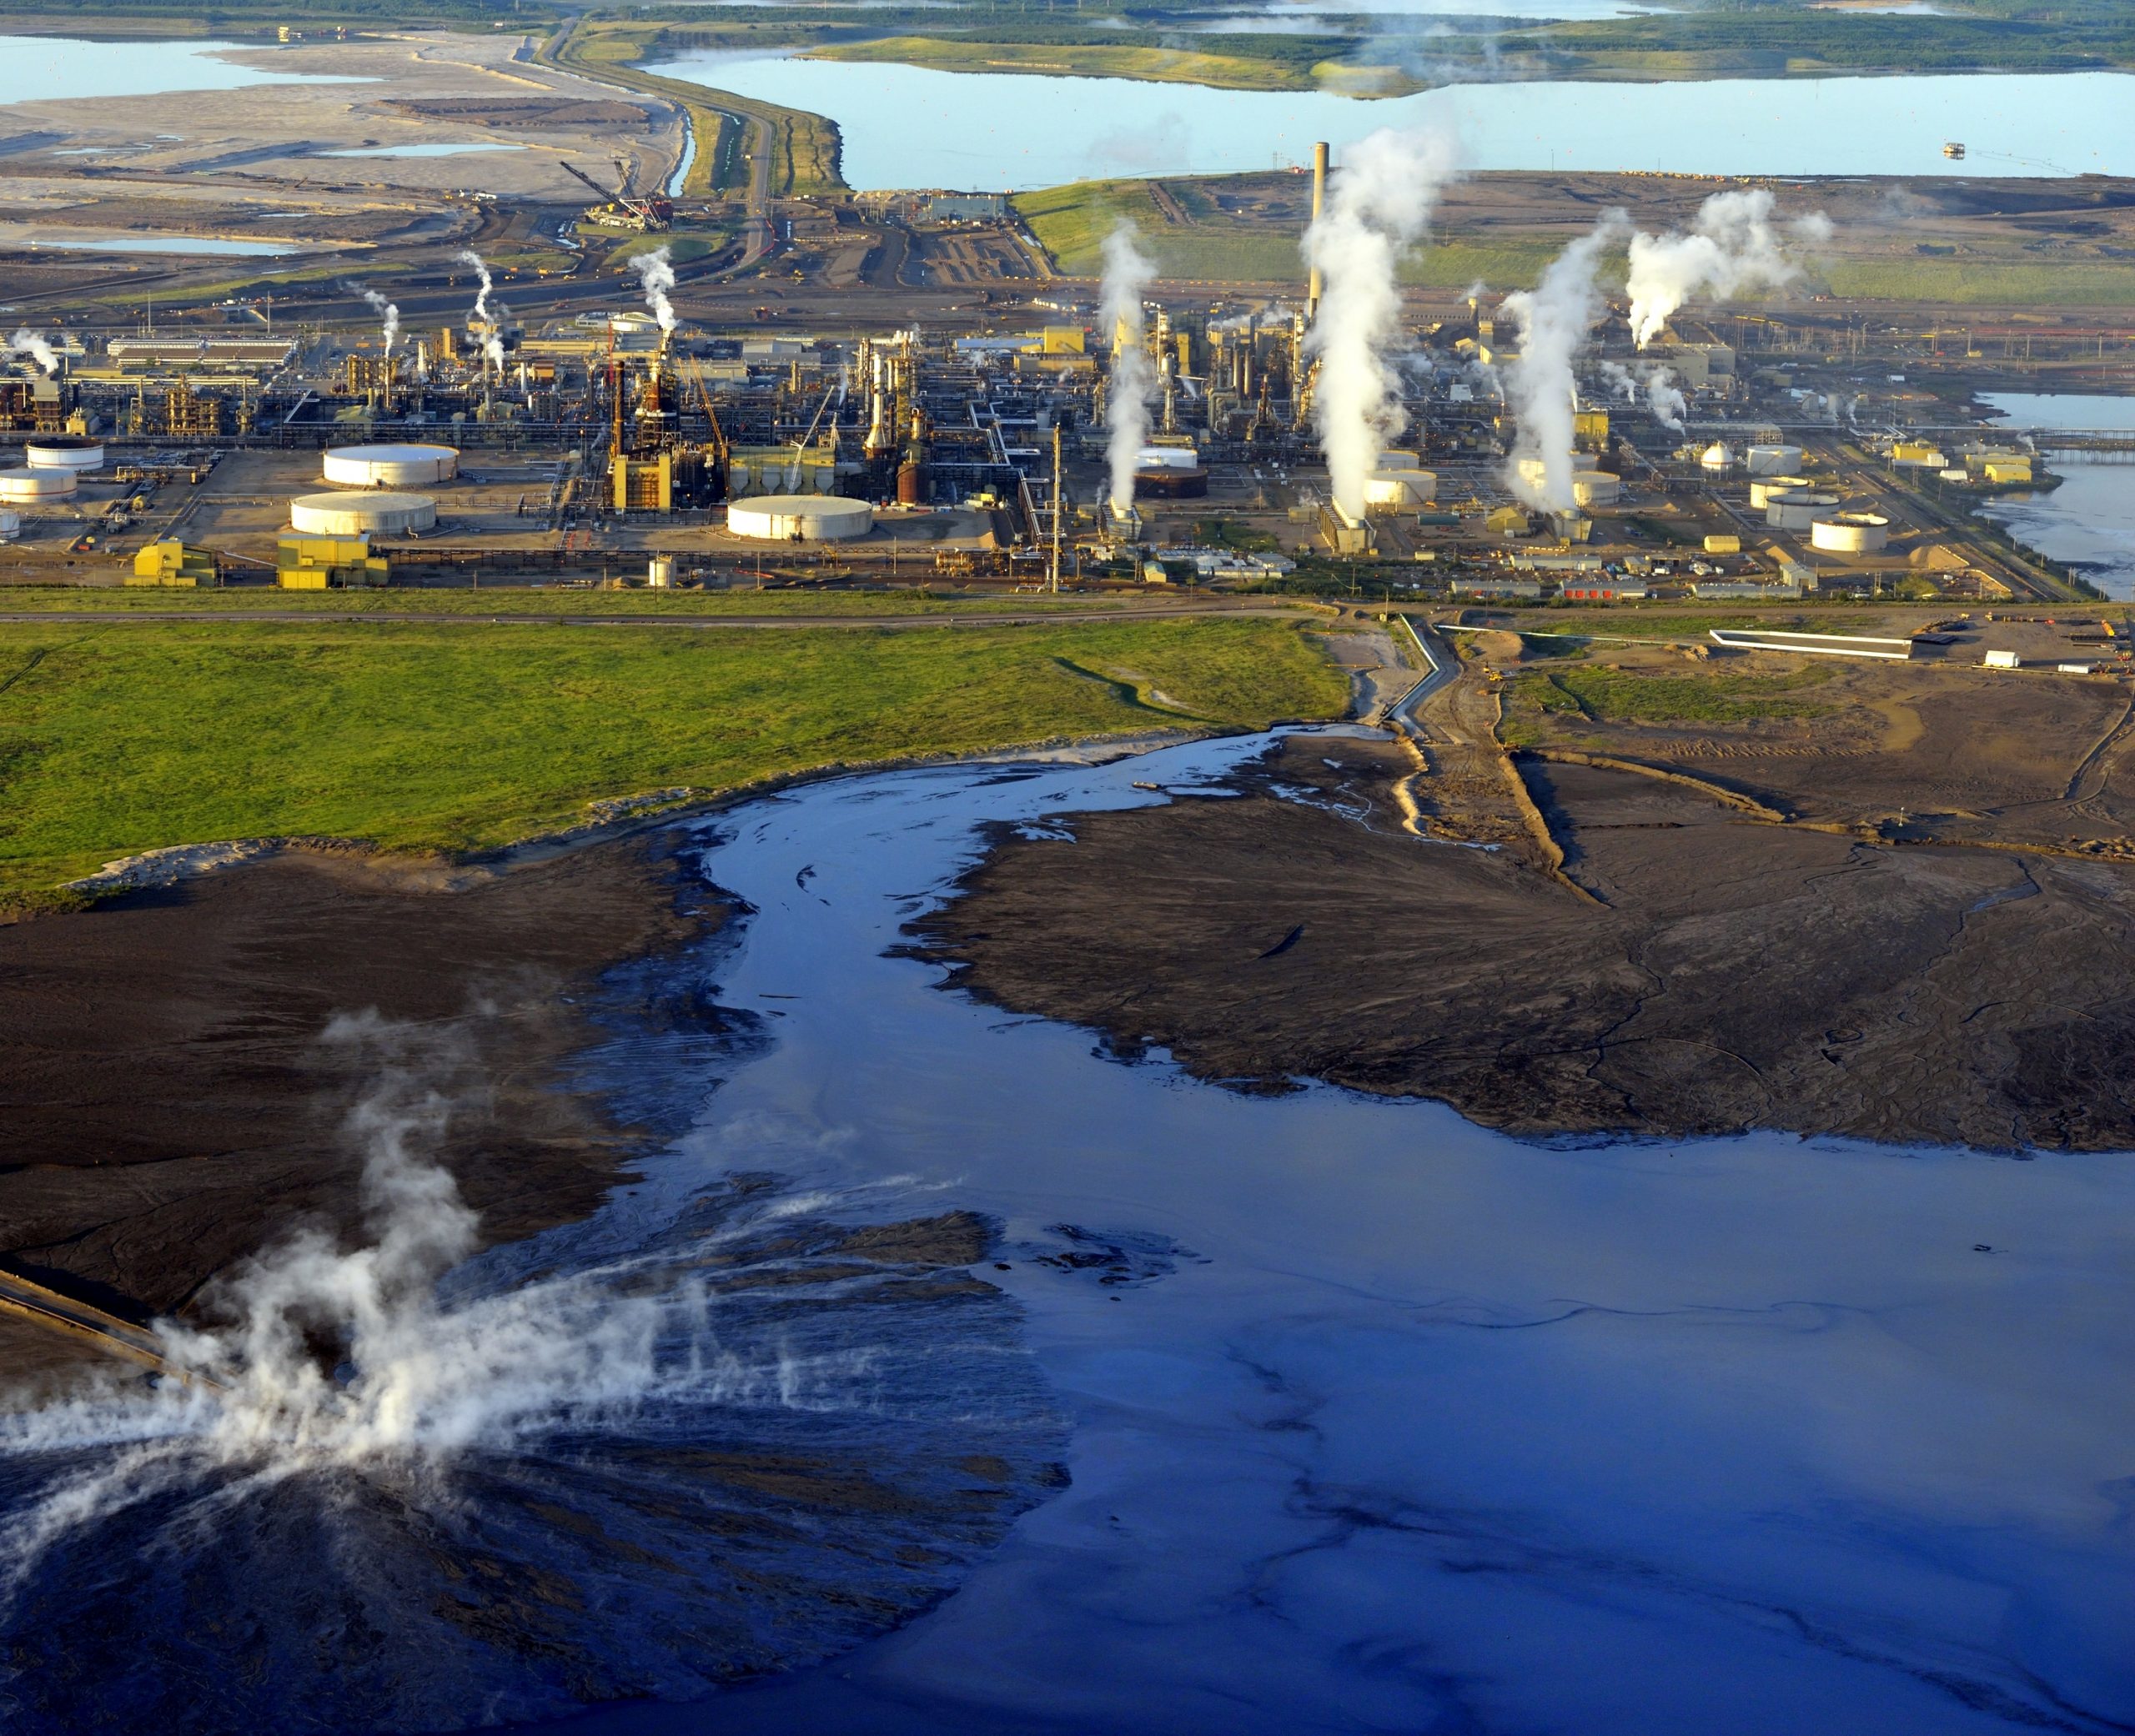 Steam at inflow to tailings pond at Syncrude's Mildred Lake bitumen refinery Oil sands north of Fort McMurray, Alberta